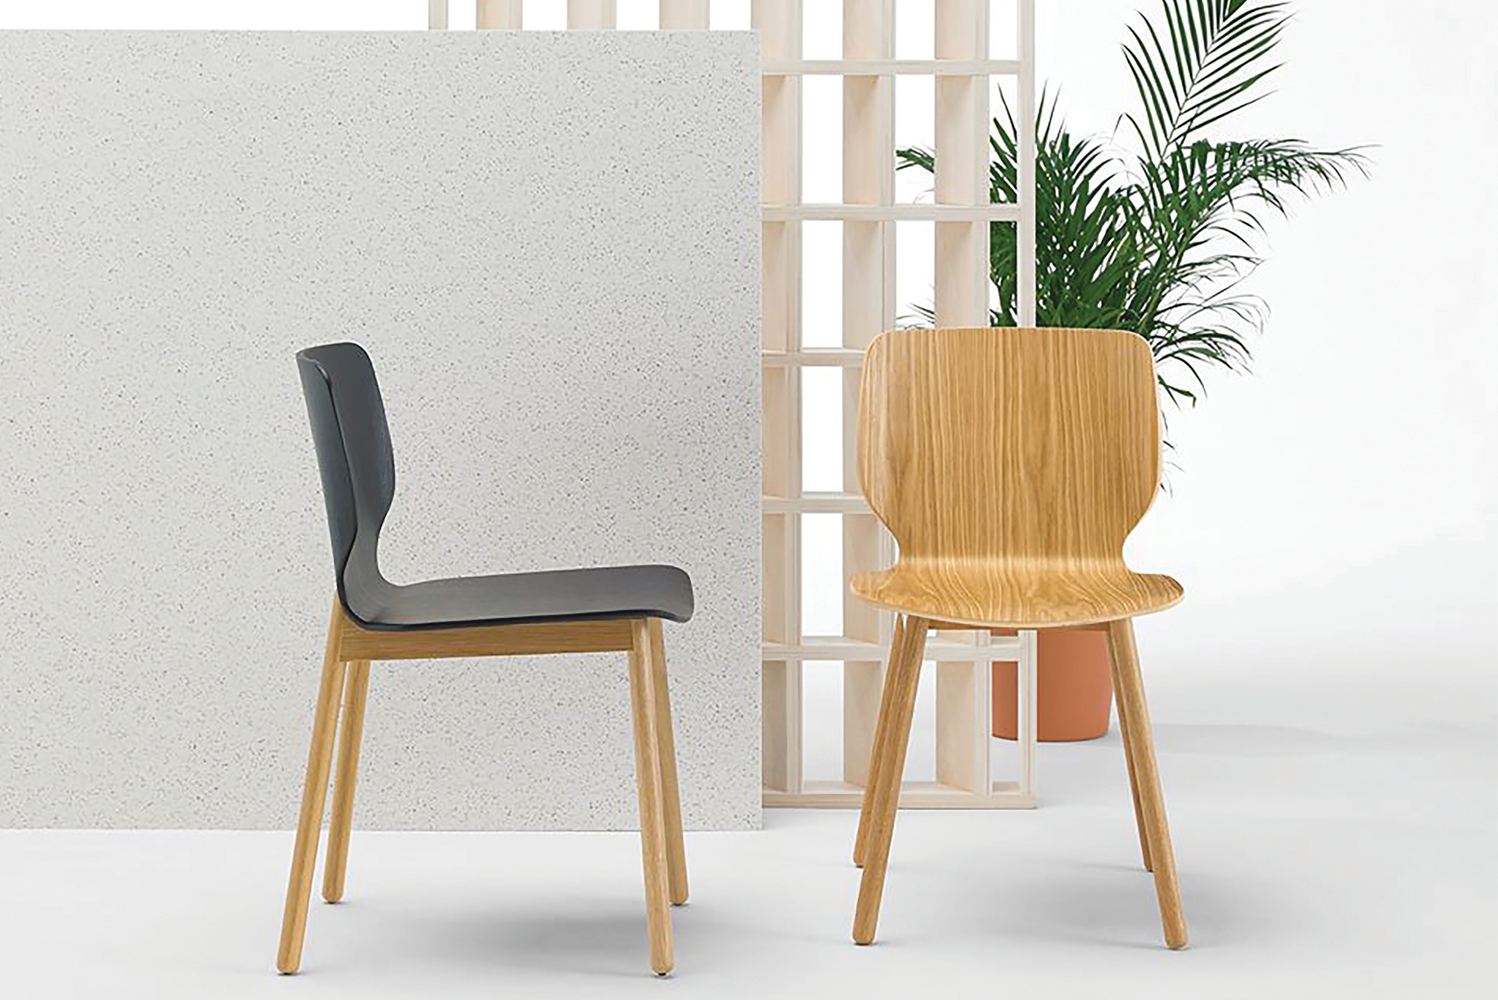 Introducing Nim a collection of chairs combining crafted wood with contrast-stitched upholstery 